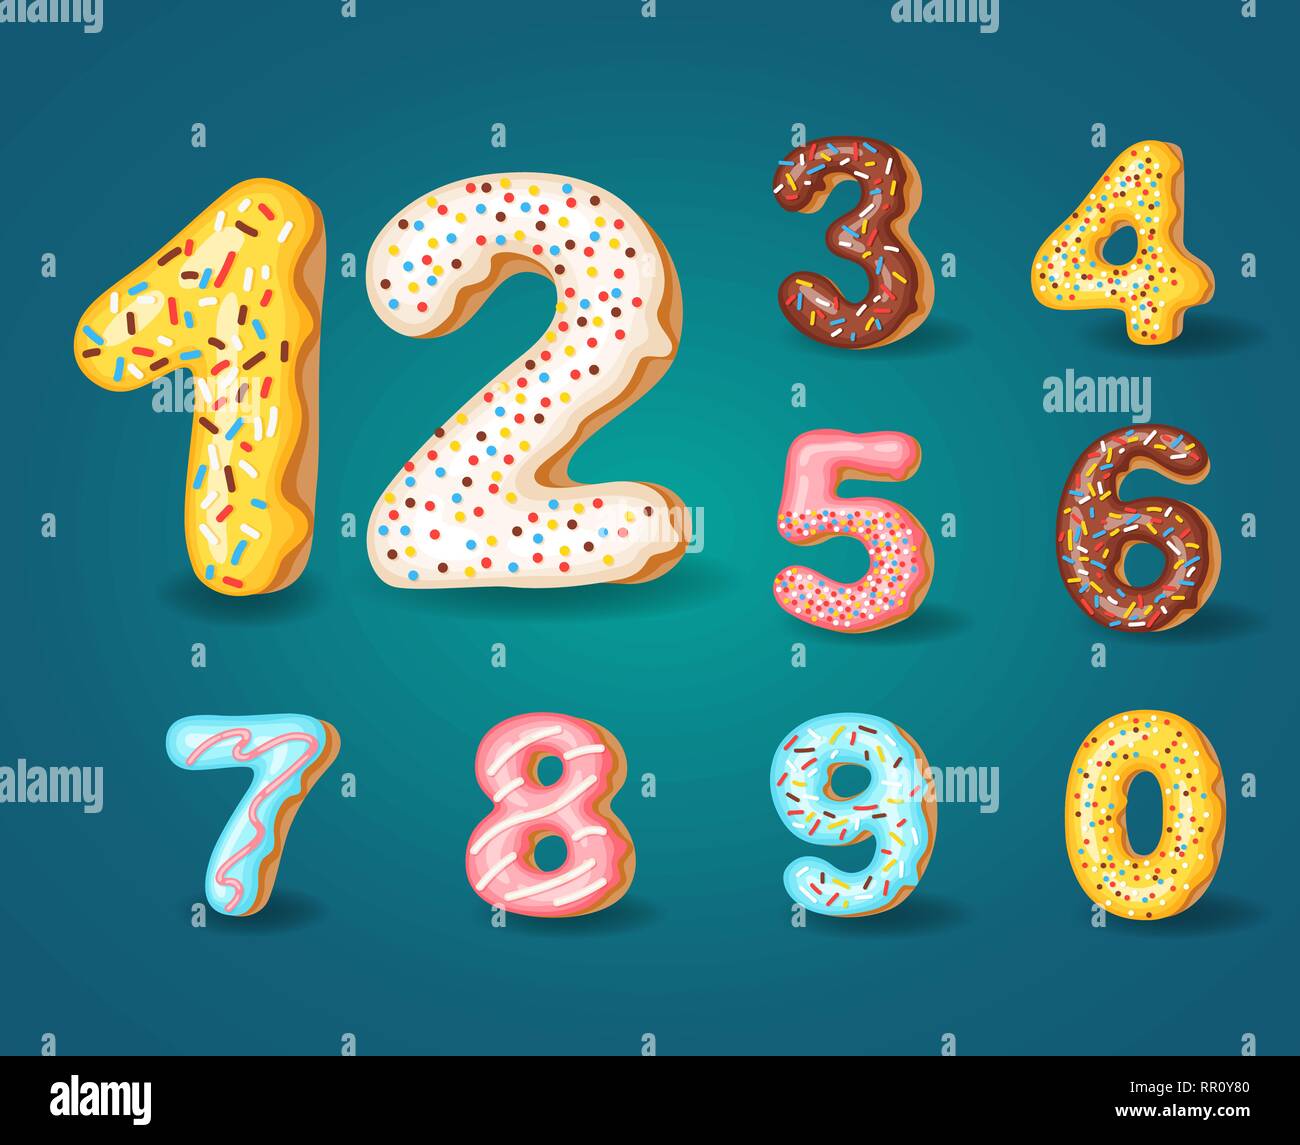 Font of donuts. Bakery sweet alphabet. Alphabet numbers Donut icing colors style 0,1,2,3,4,5,6,7,8,9 ,0. Vector illustration Stock Vector